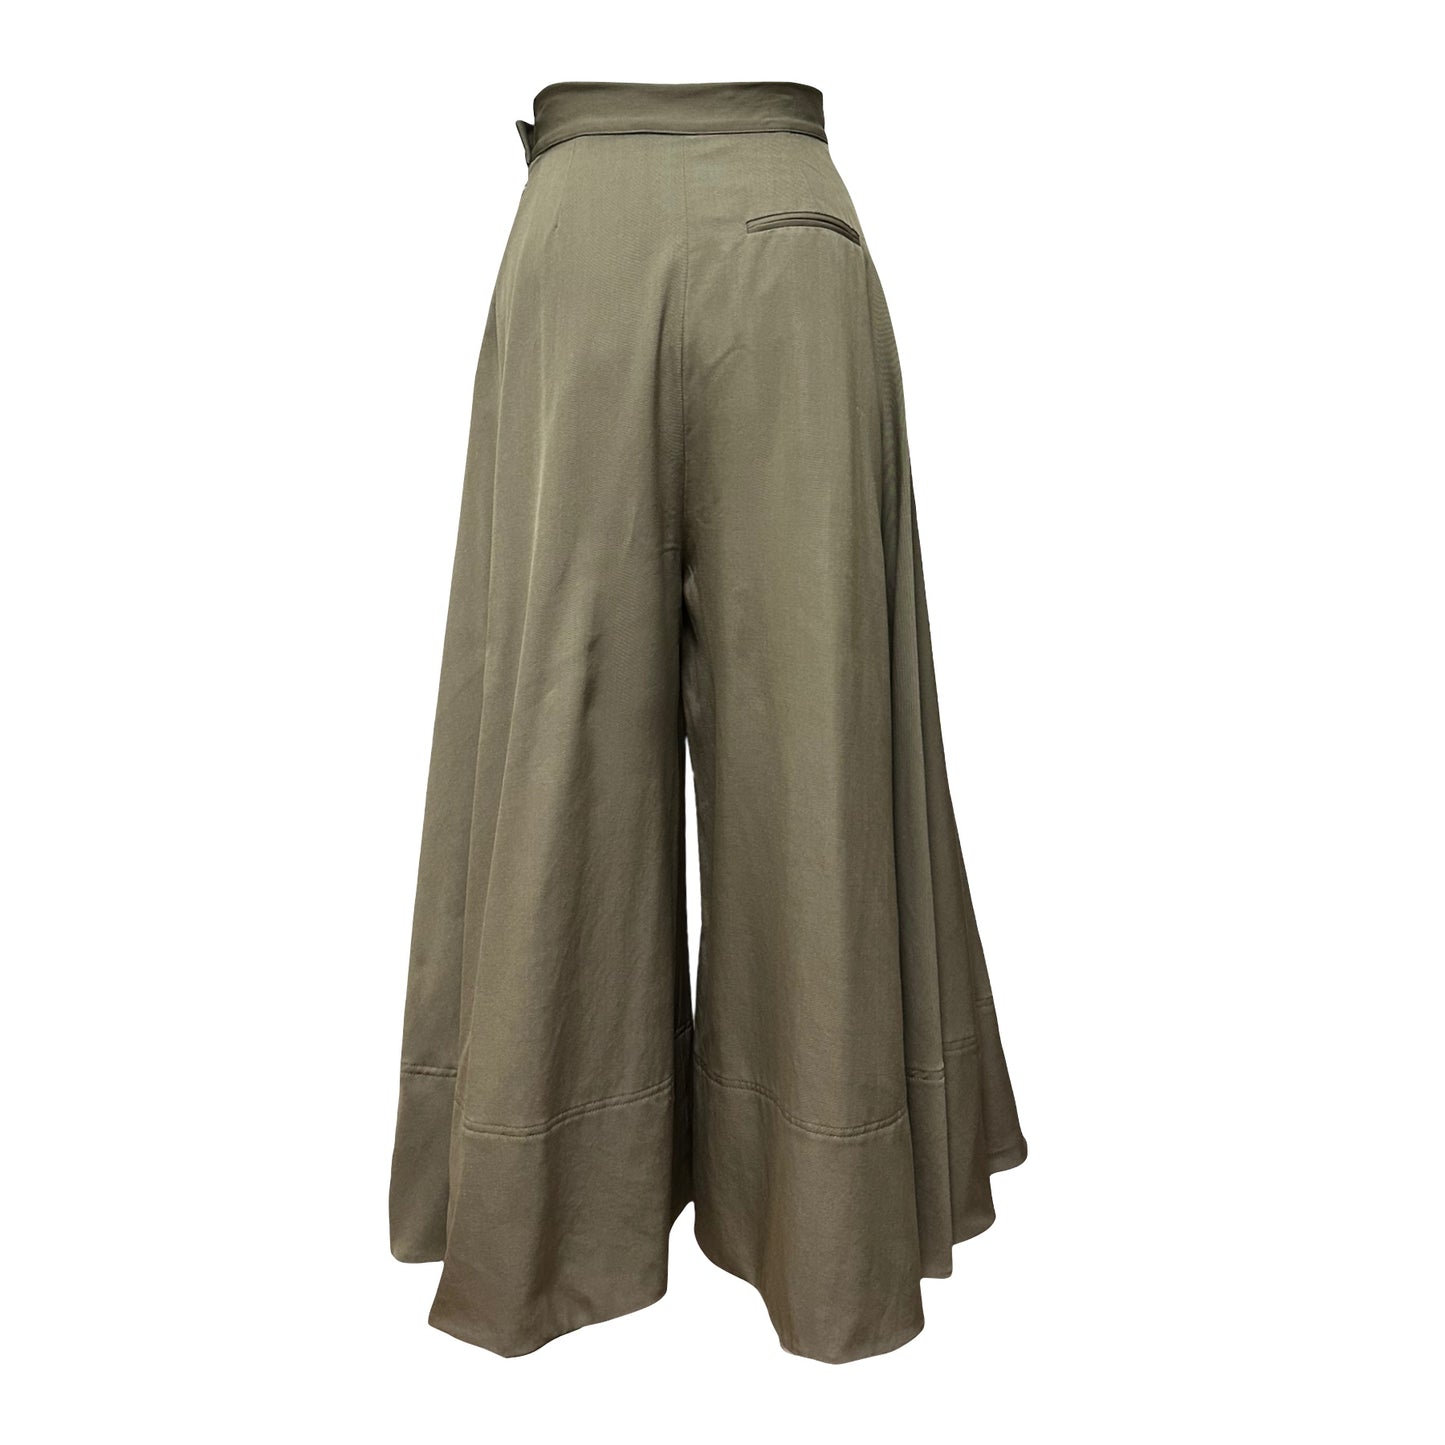 LOEWE Spring Summer 2020 High Rise Twill Culotte Trousers